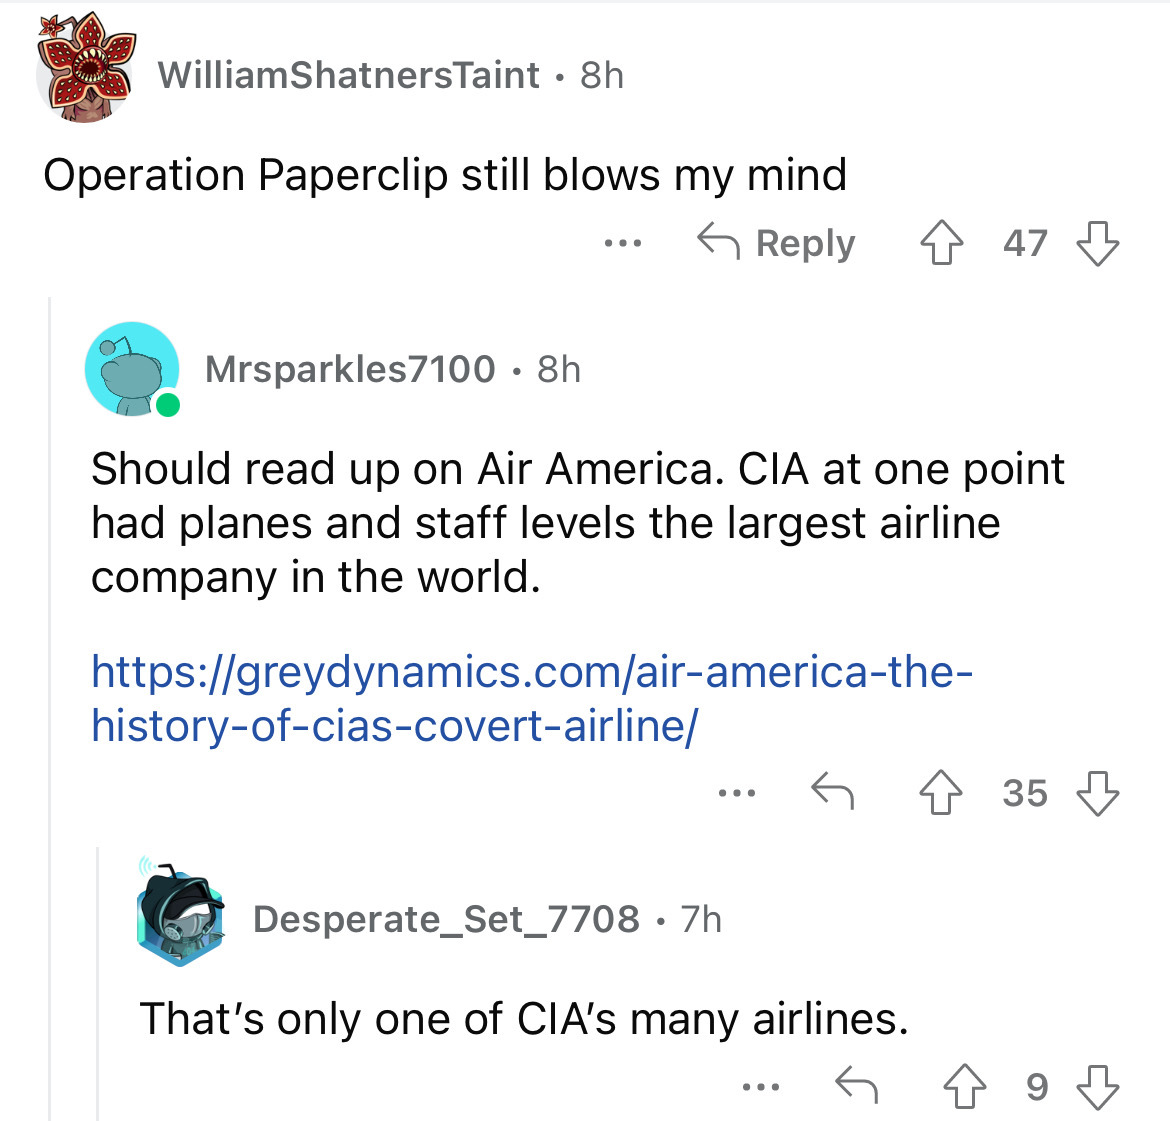 angle - William ShatnersTaint . 8h Operation Paperclip still blows my mind ... Mrsparkles7100 8h Should read up on Air America. Cia at one point had planes and staff levels the largest airline company in the world. historyofciascovertairline ... Desperate